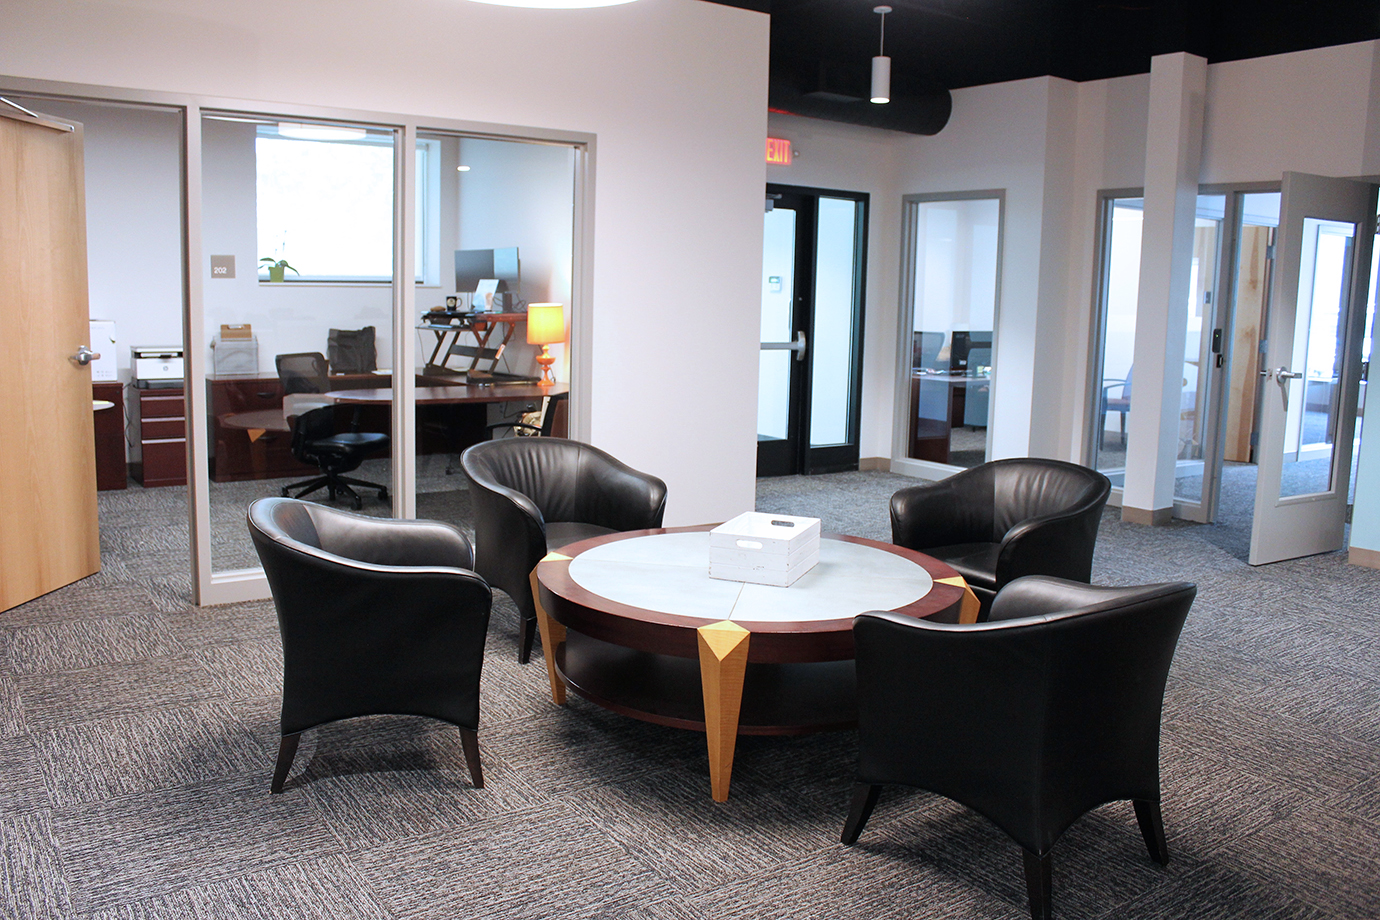 Photo of chairs and other donated furniture items in Simpson Housing Service's entrance lobby.